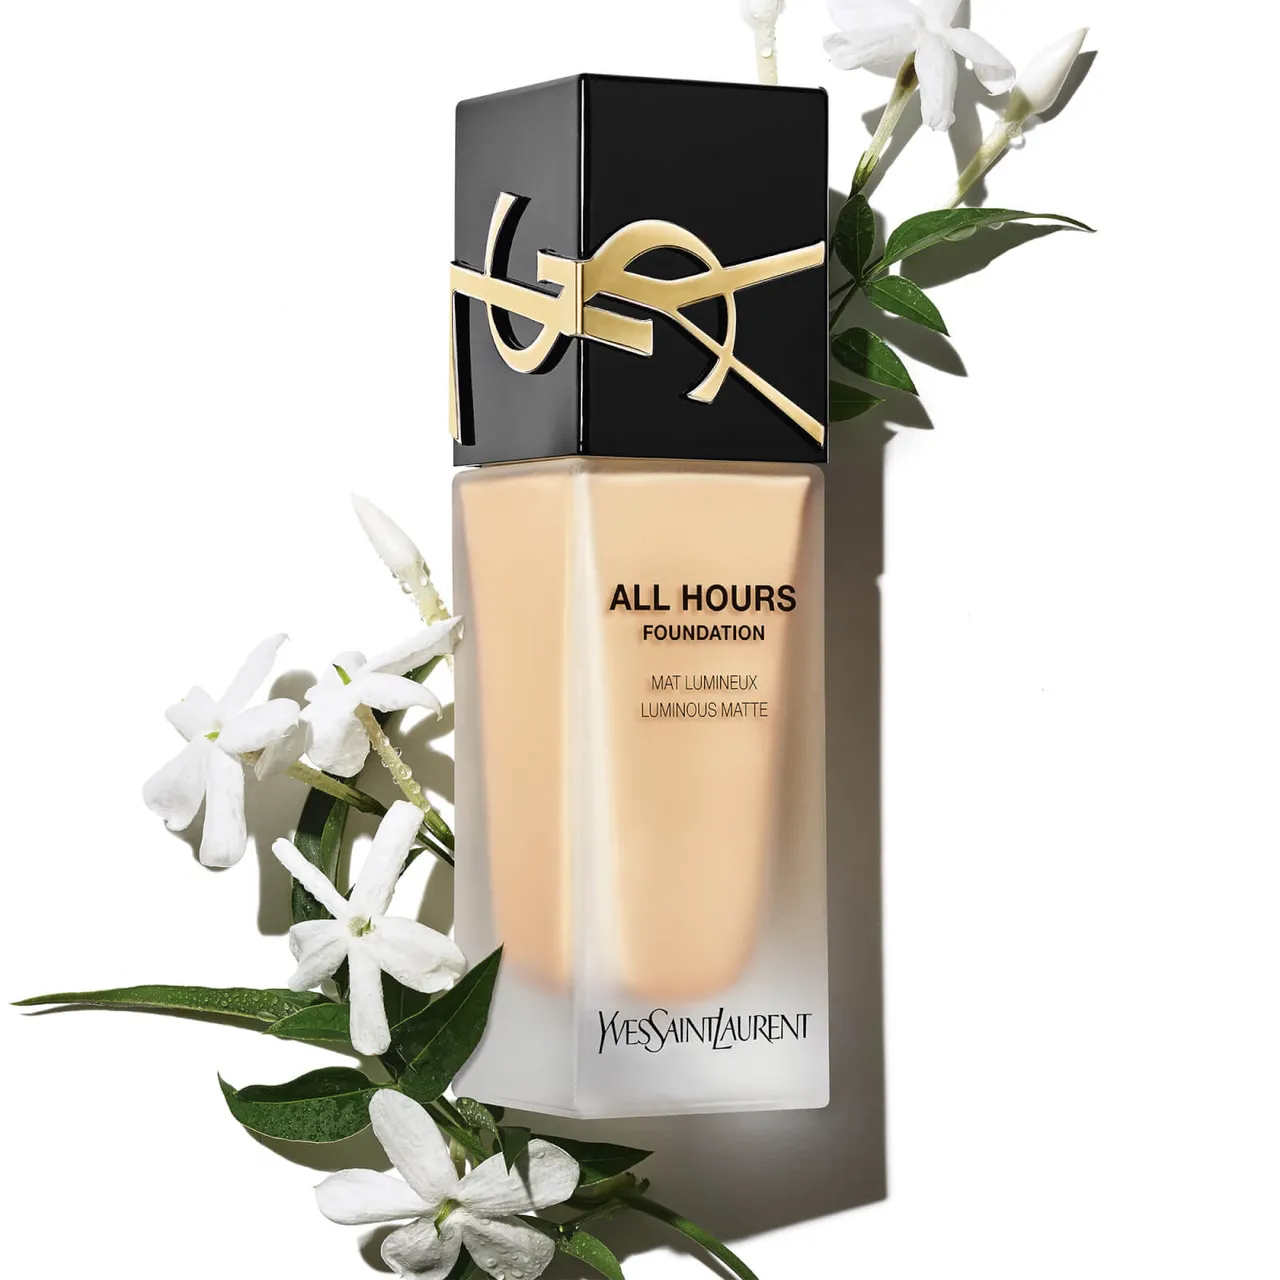 Yves Saint Laurent All Hours Luminous Matte Foundation with SPF 39 25ml (Various Shades) - DN5